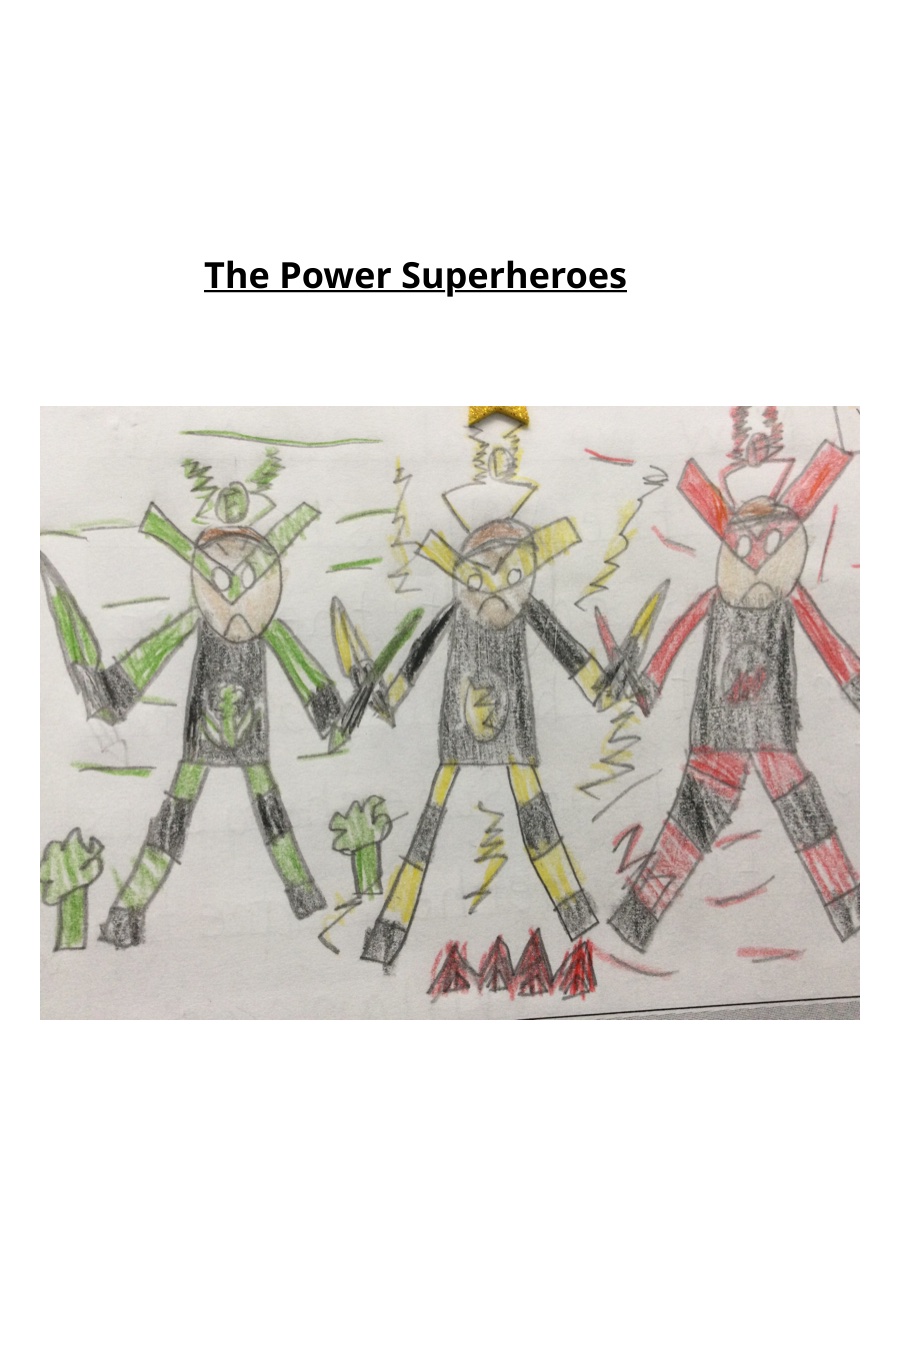 The Power Superheroes by Maddon L